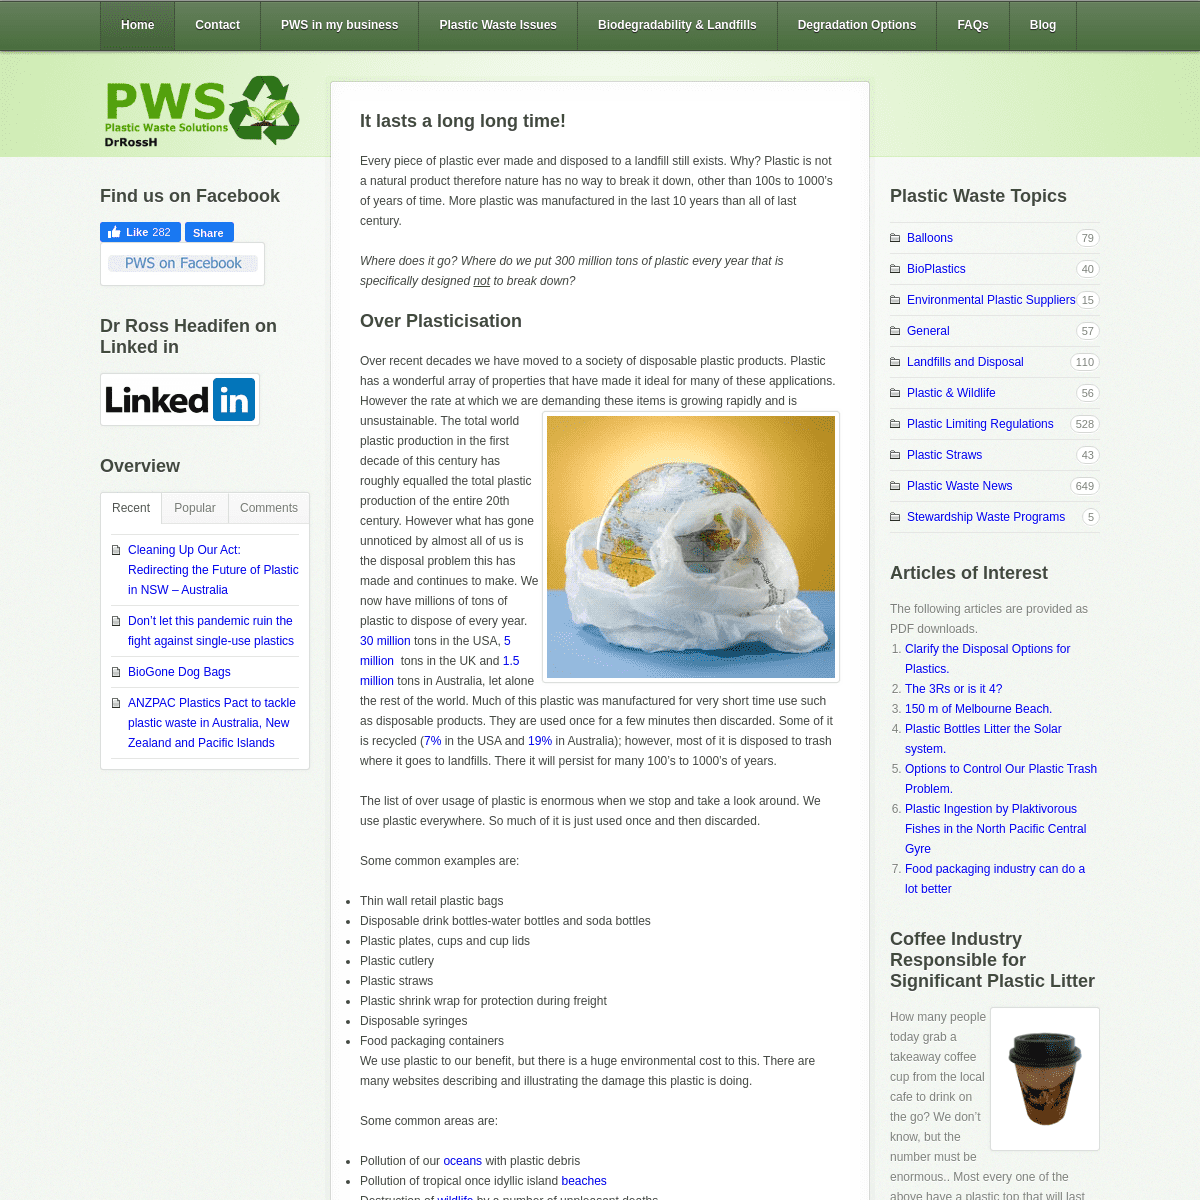 A complete backup of plasticwastesolutions.com